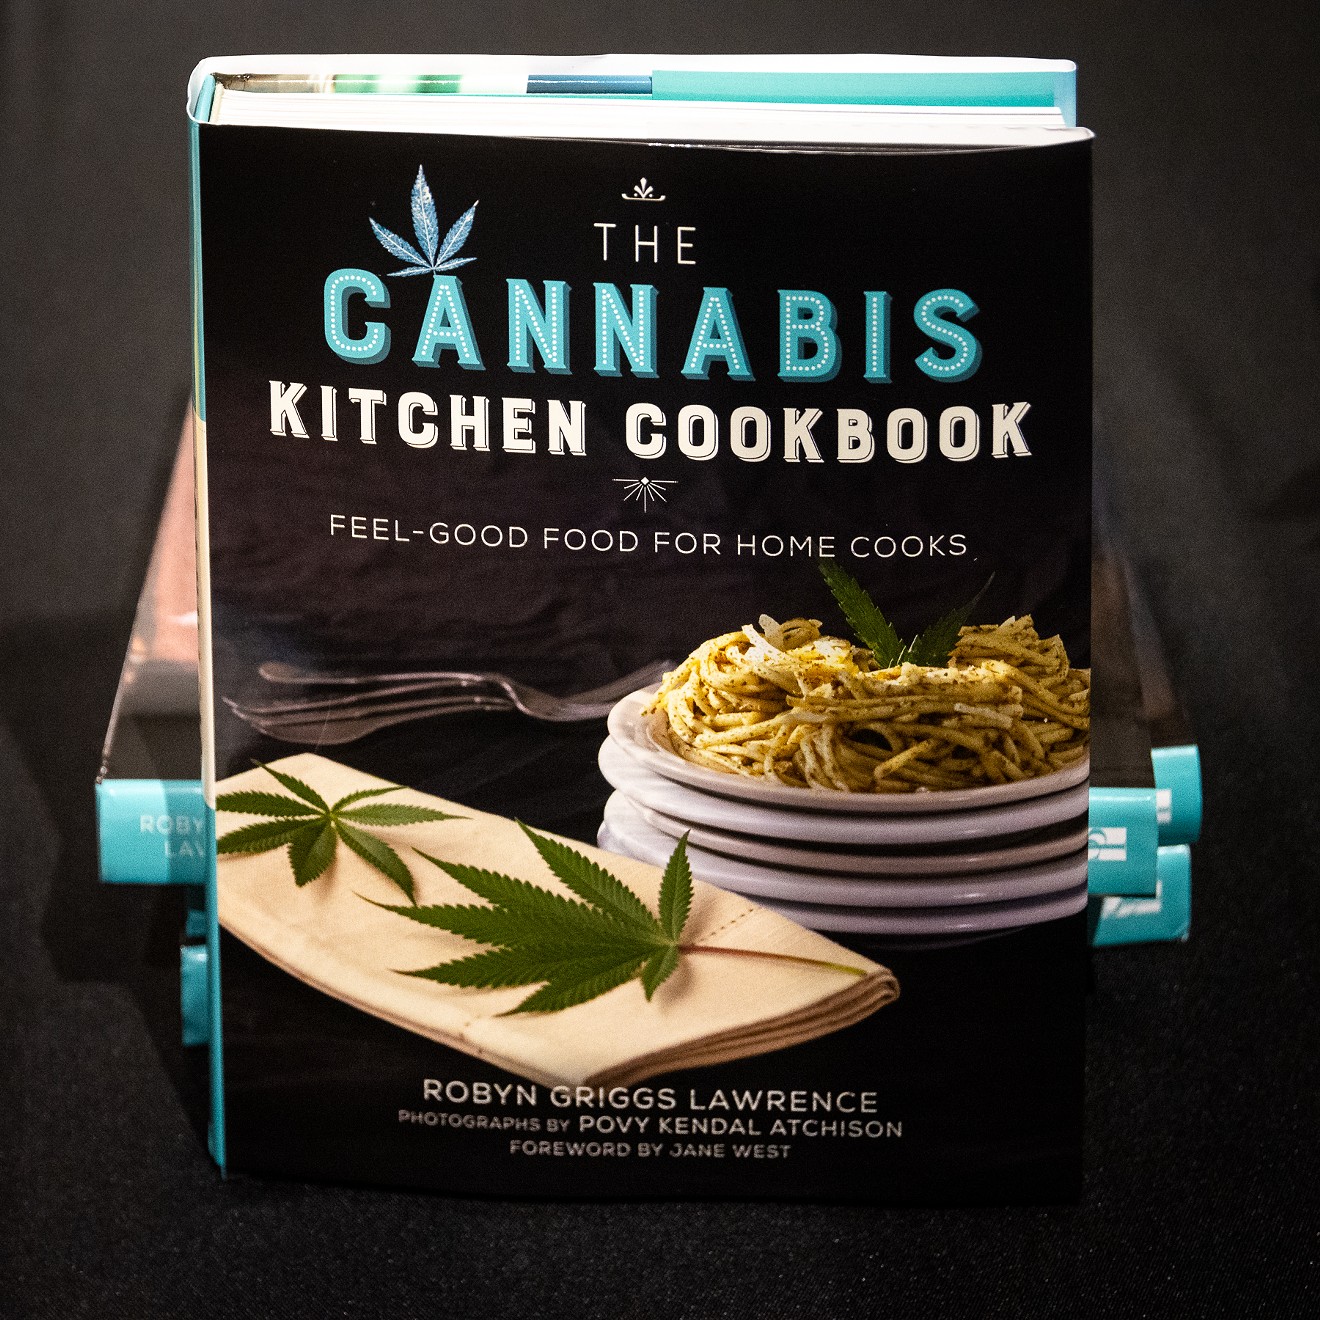 The Cannabis Kitchen Cookbook, the first of two fun reads about edibles by Boulder author Robyn Griggs Lawrence.